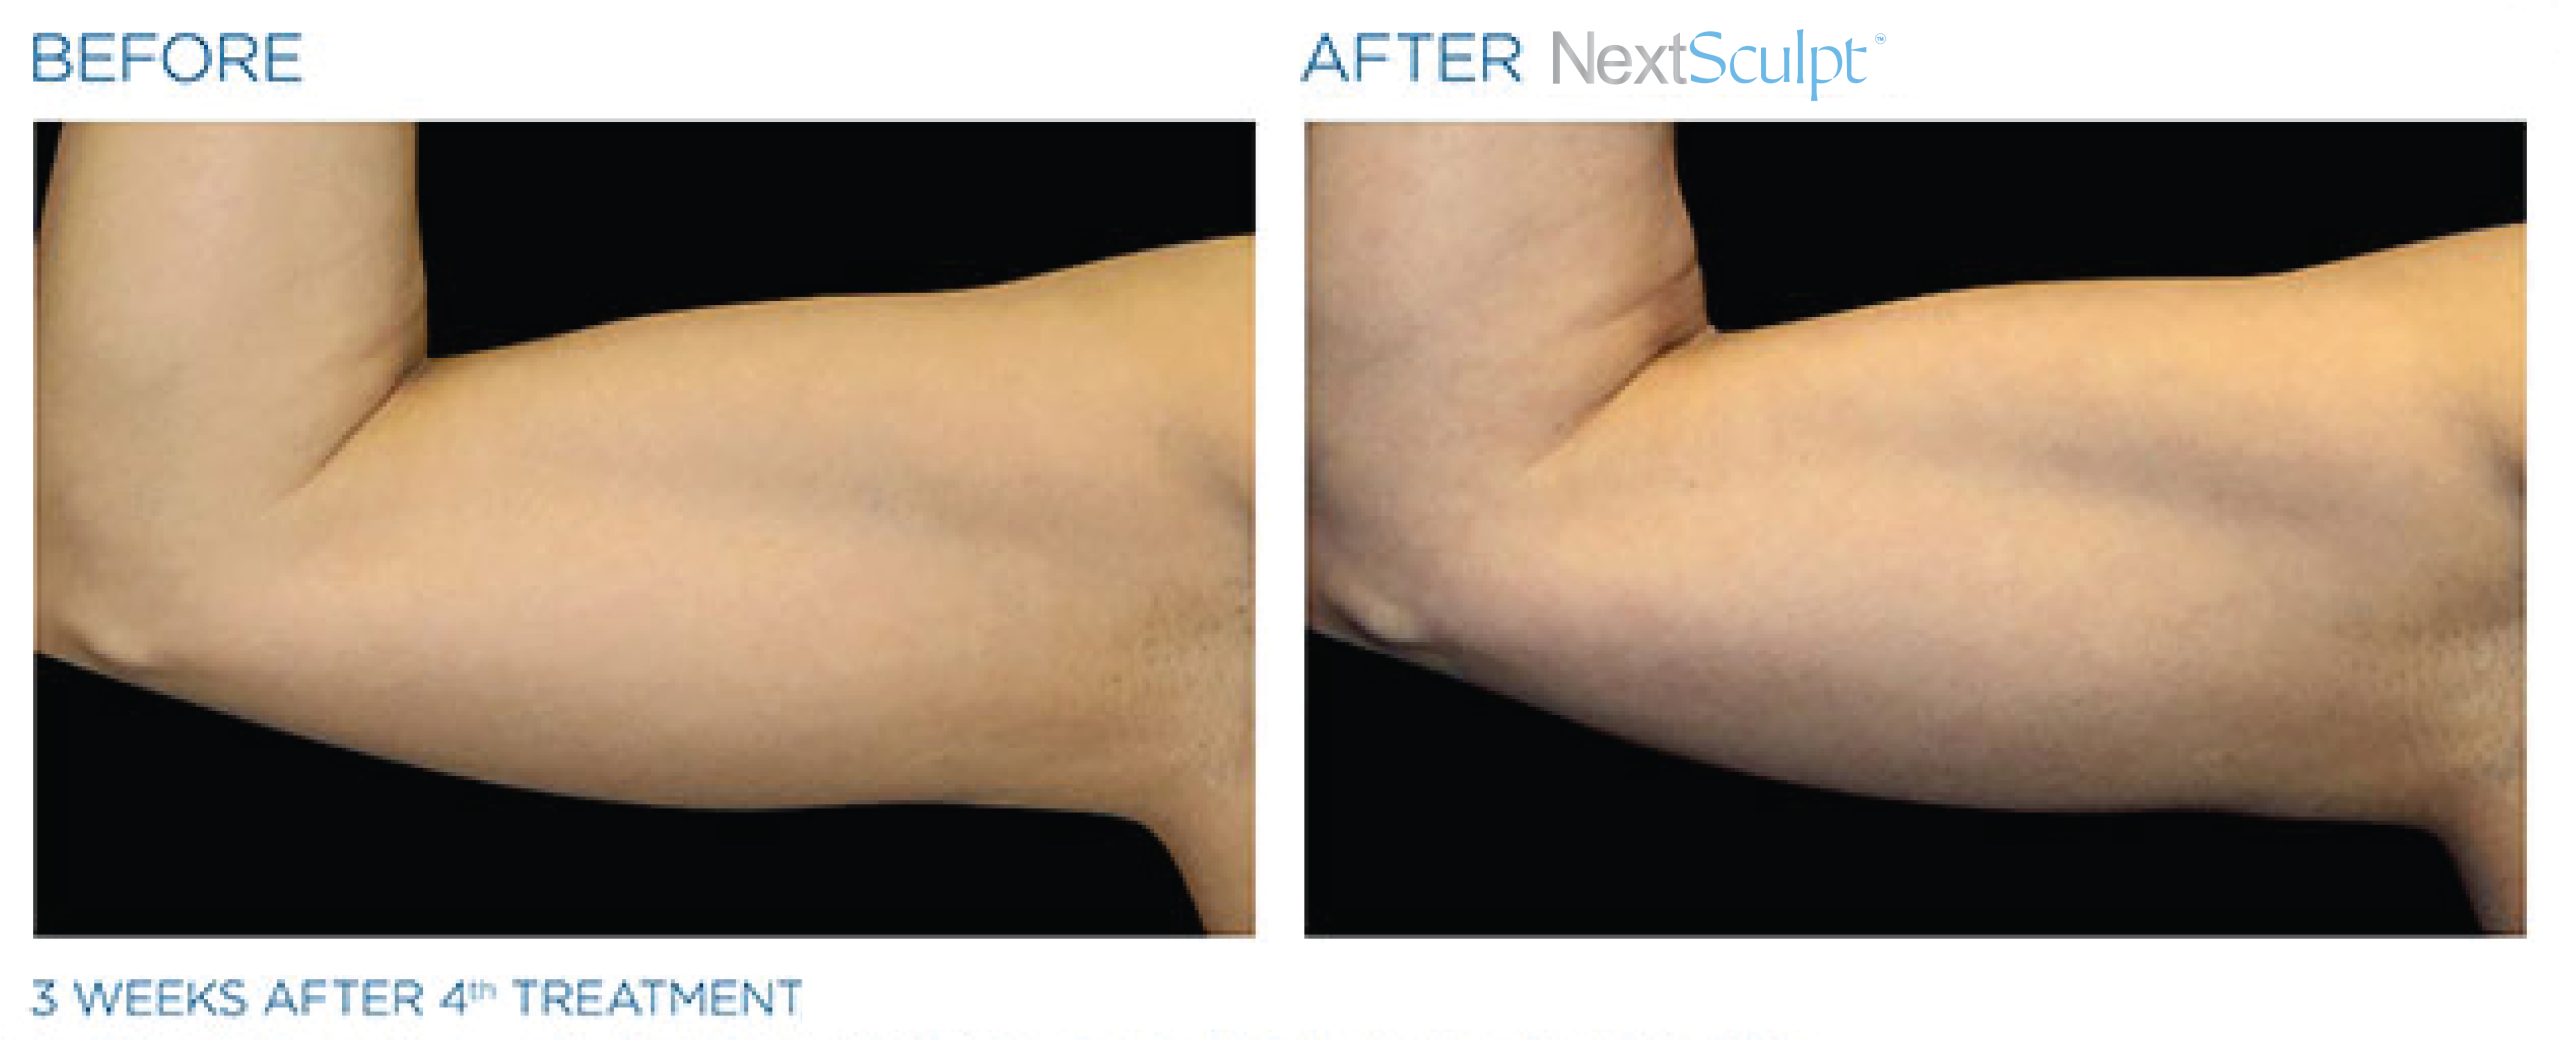 nextsculpt-before-after-14-scaled.jpg